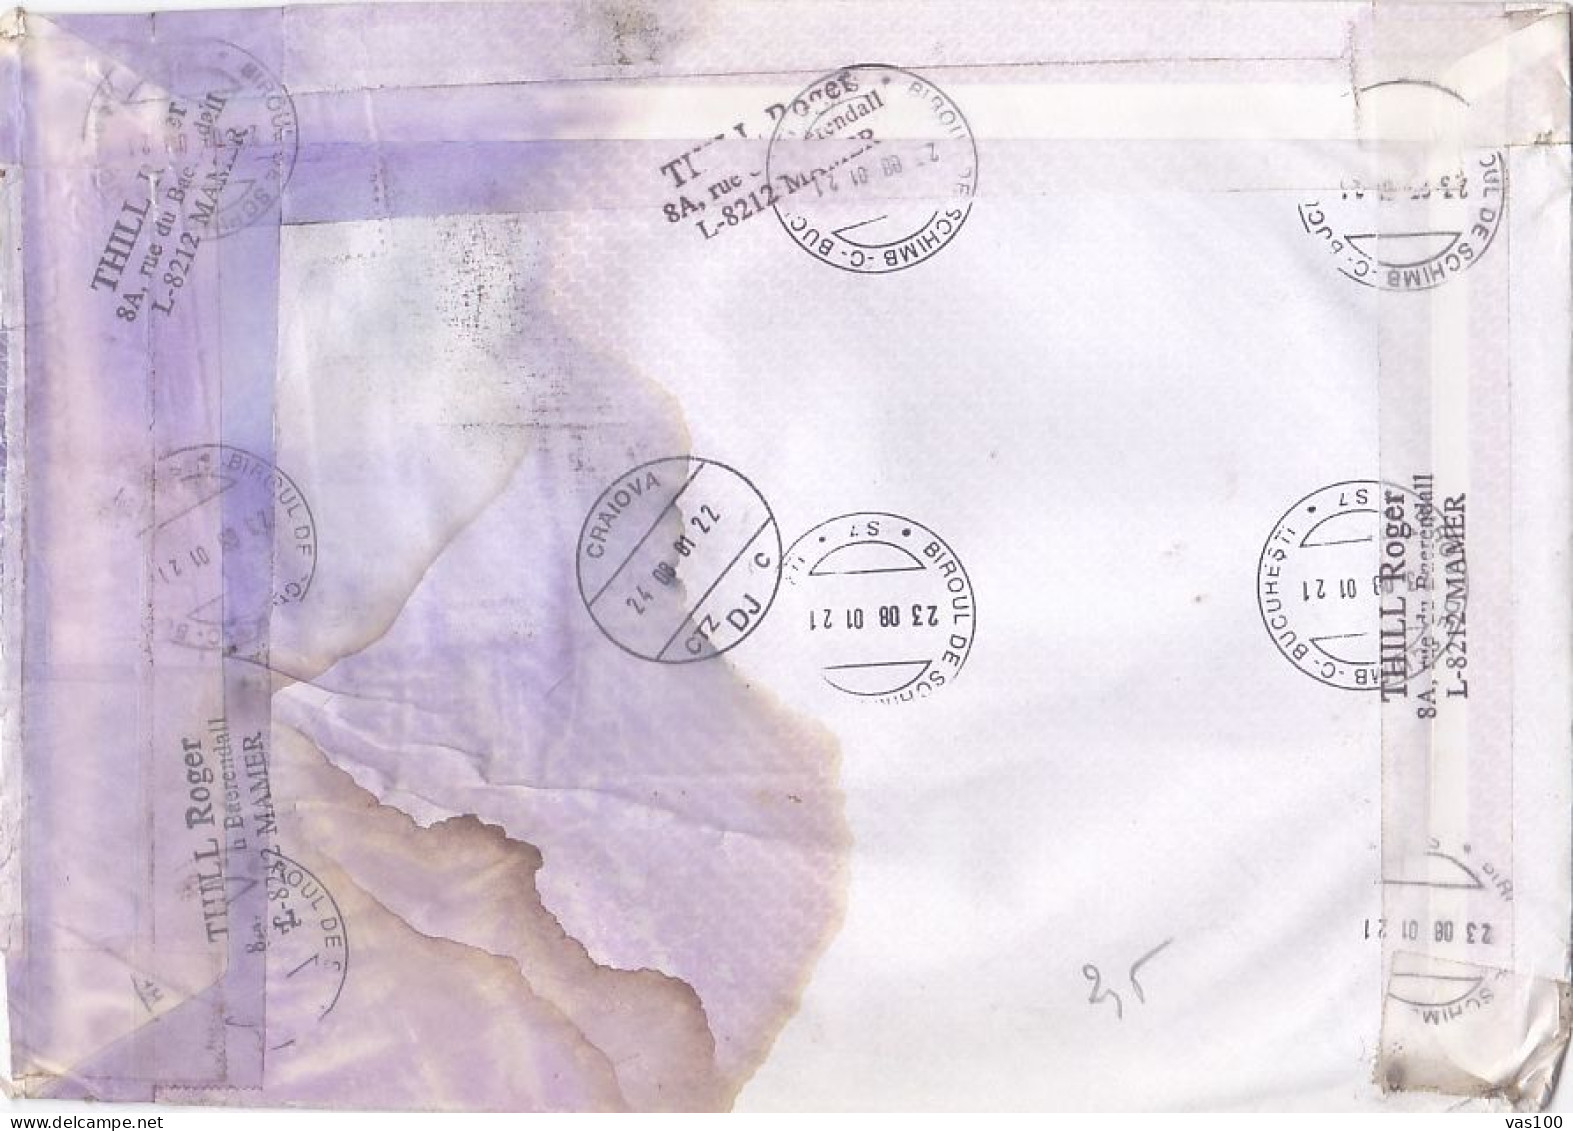 PLANE, FIRST CAR, MONUMENT, TOWER, FROG, FIREFIGHTERS, STAMPS ON REGISTERED COVER, 2001, LUXEMBOURG - Briefe U. Dokumente